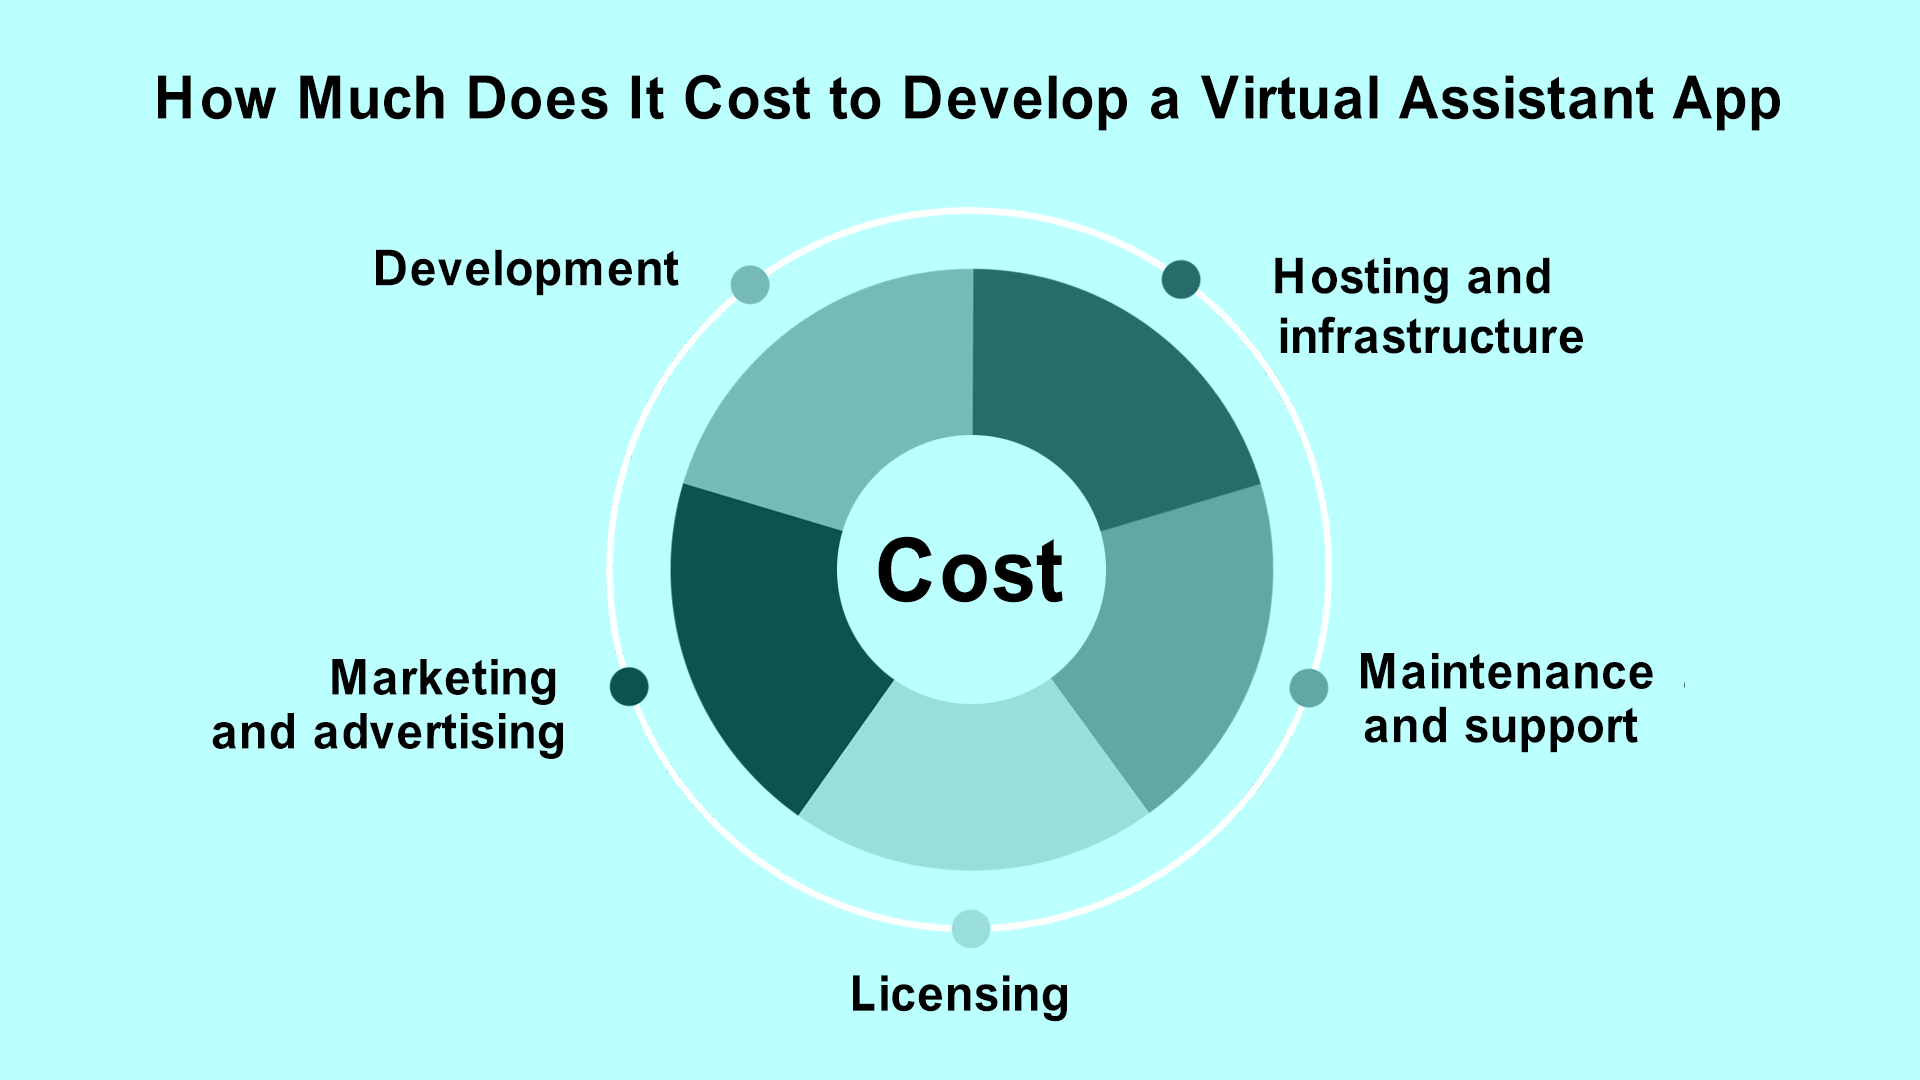 How Much Does It Cost to Develop a Virtual Assistant App